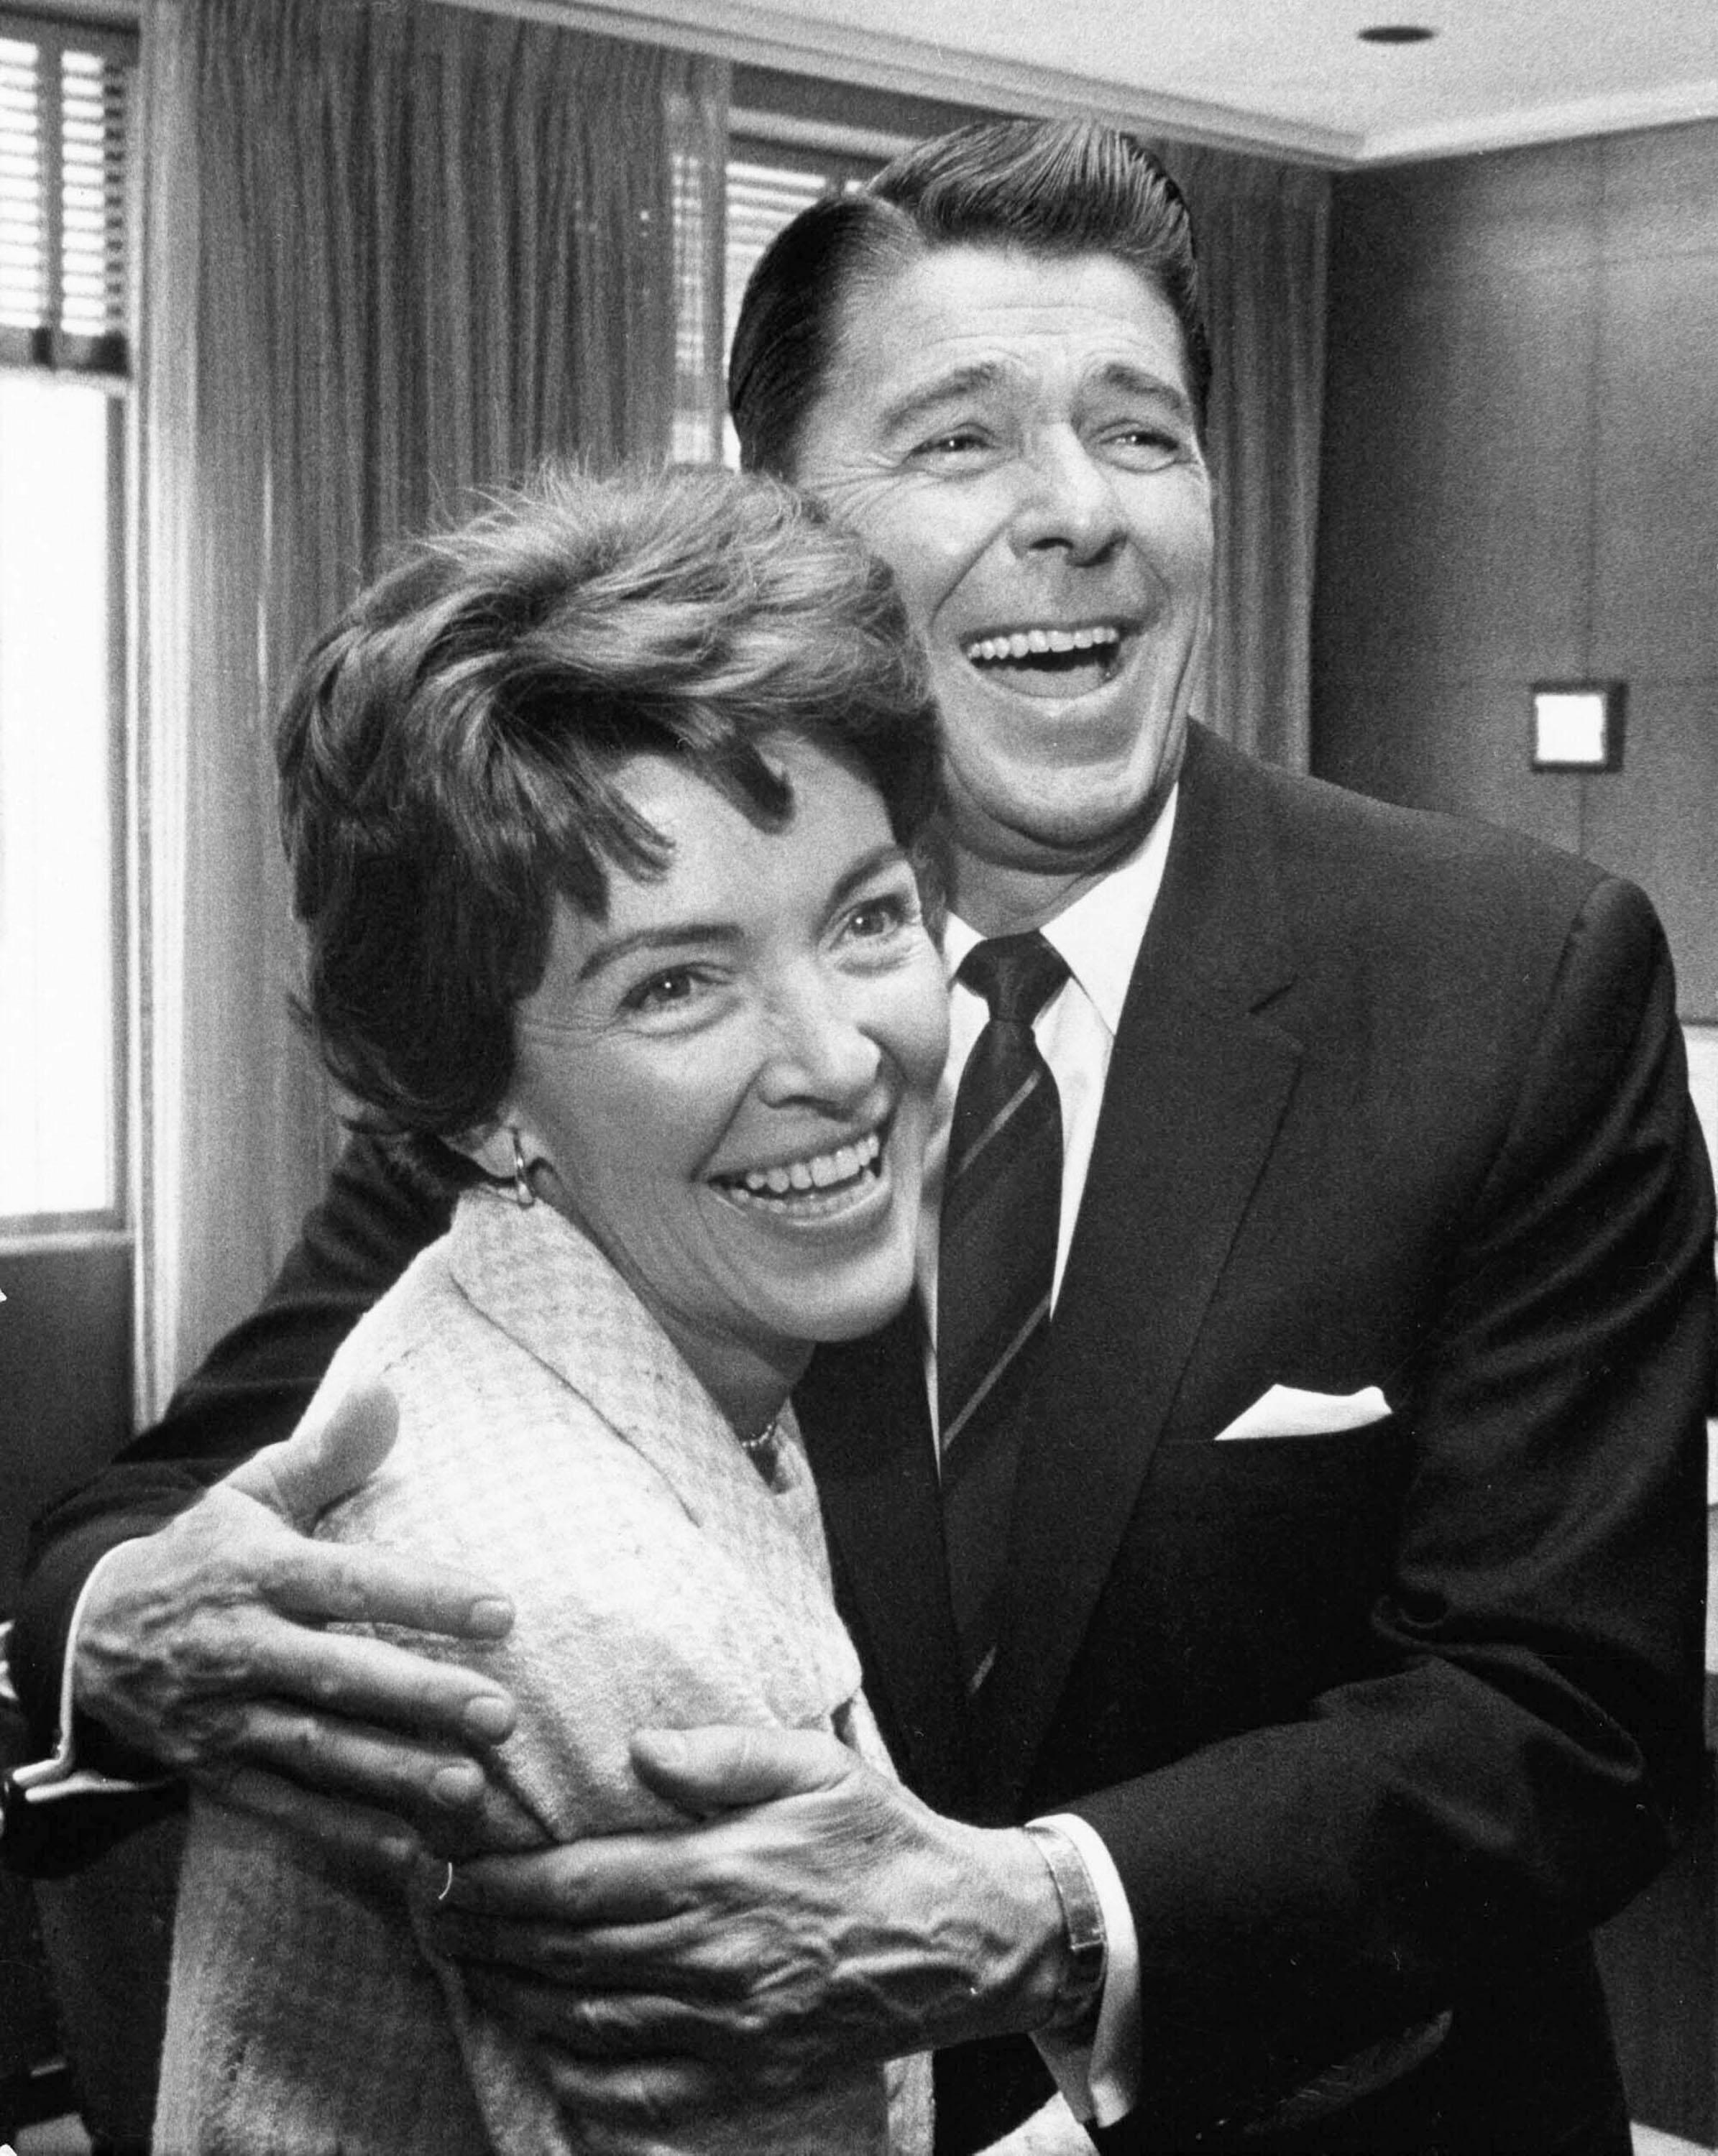 Nancy Reagan history the real story of her time in Hollywood.